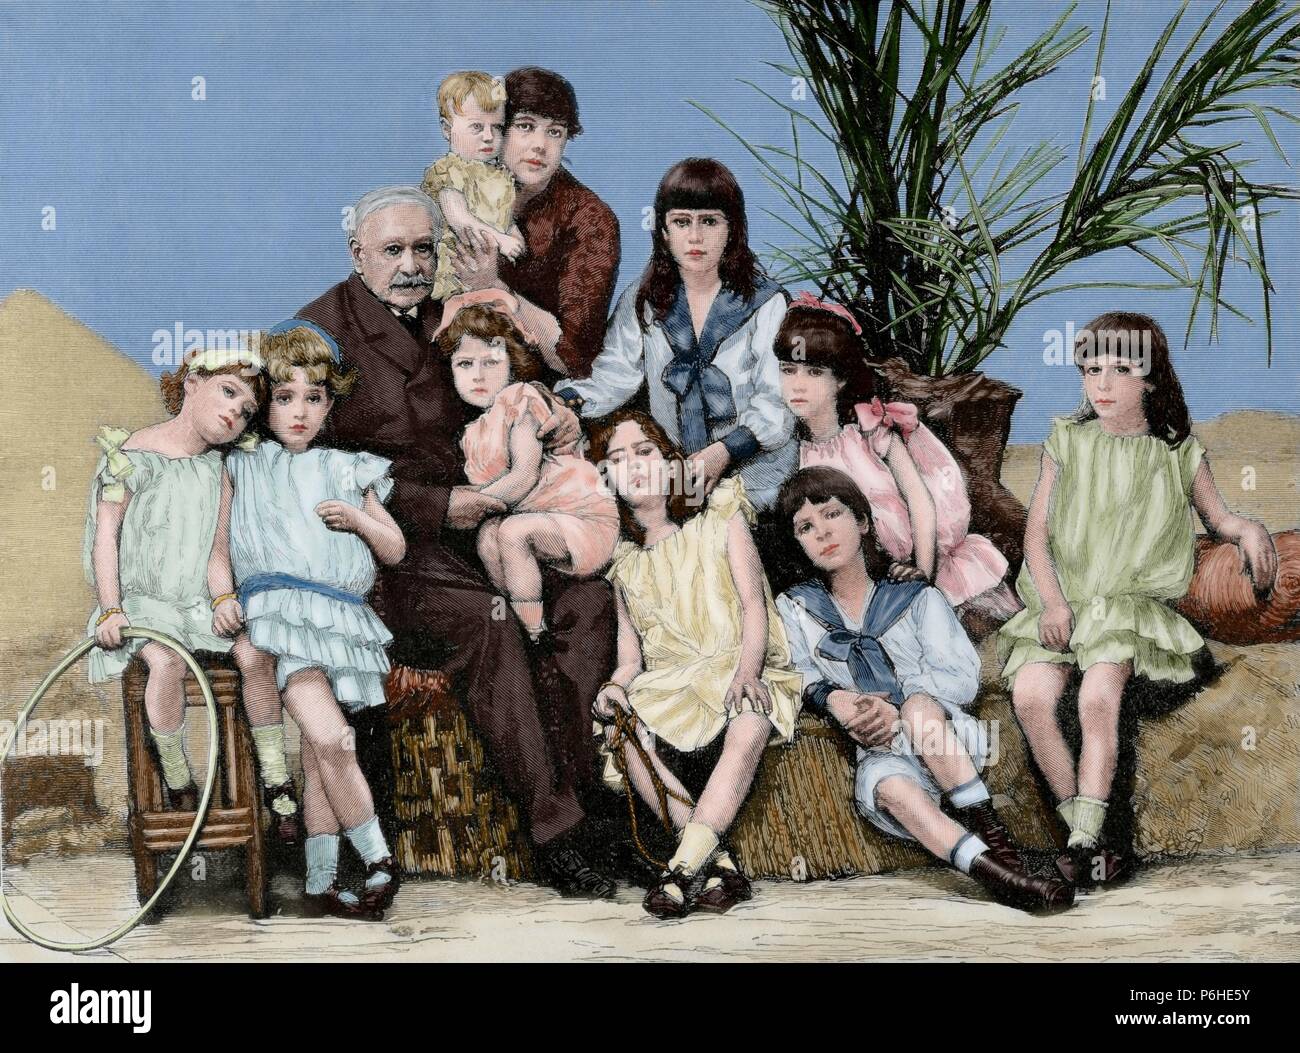 Ferdinand de Lesseps (1805-1894). French diplomat and entrepreneur. Lesseps with his family. Engraving in The Artistic Illustration, 1886. Colored. Stock Photo